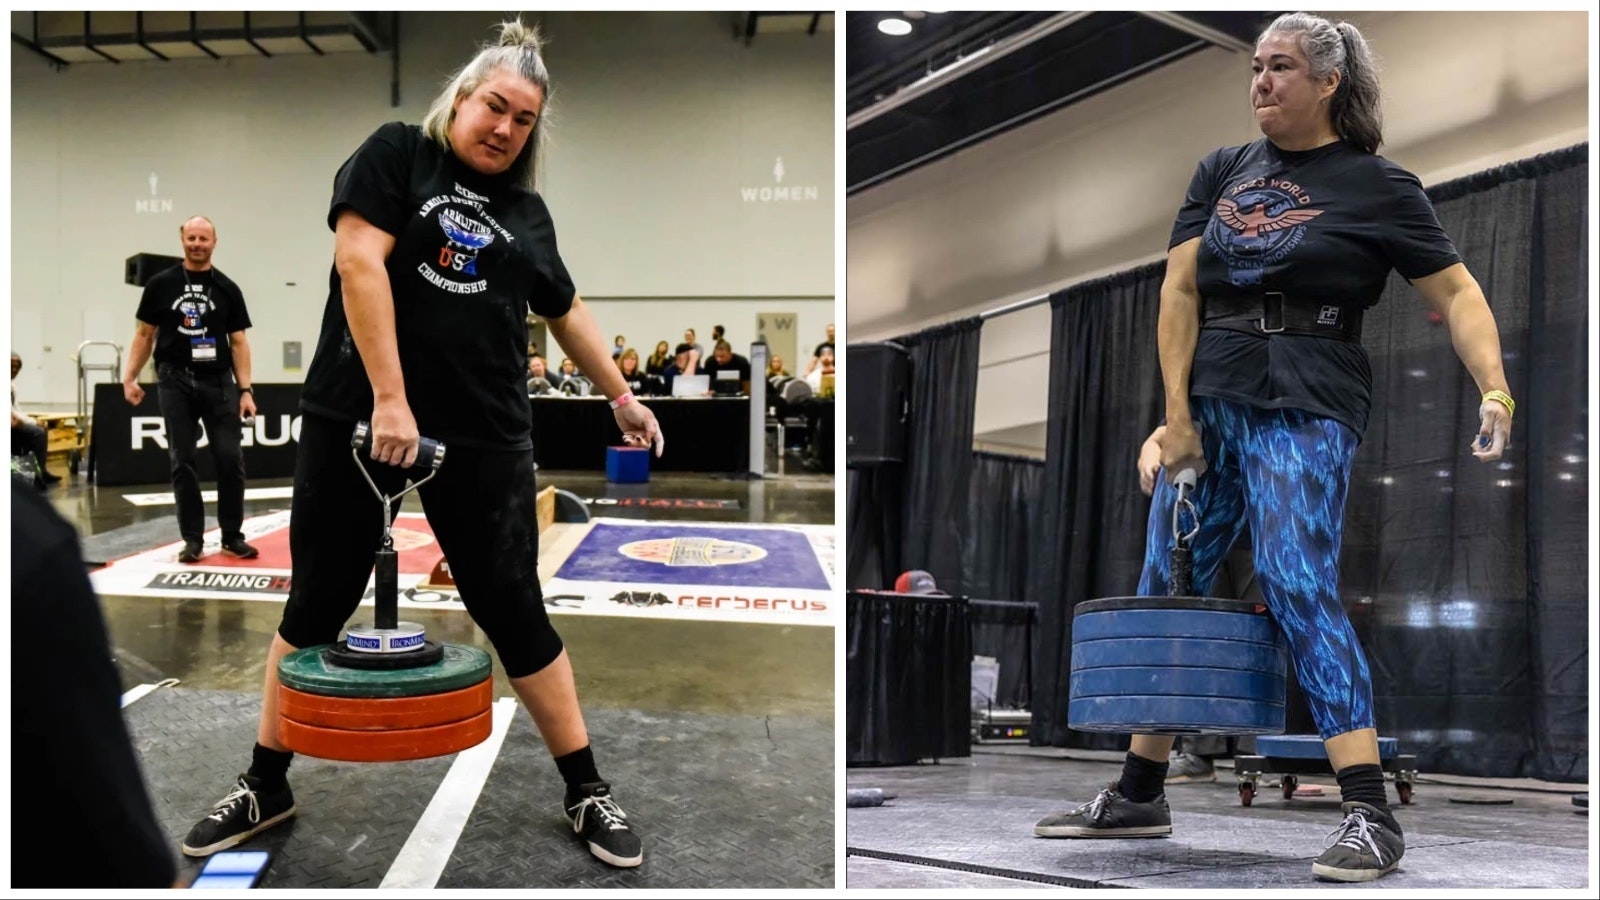 Glenrock's Sarah Chappelow competes in grip competitions. At left, she's lifting in the 2022 Arnold Sports Festival while at right was earlier this month at the 2023 Grip Wars in Sweden, where she placed third overall.